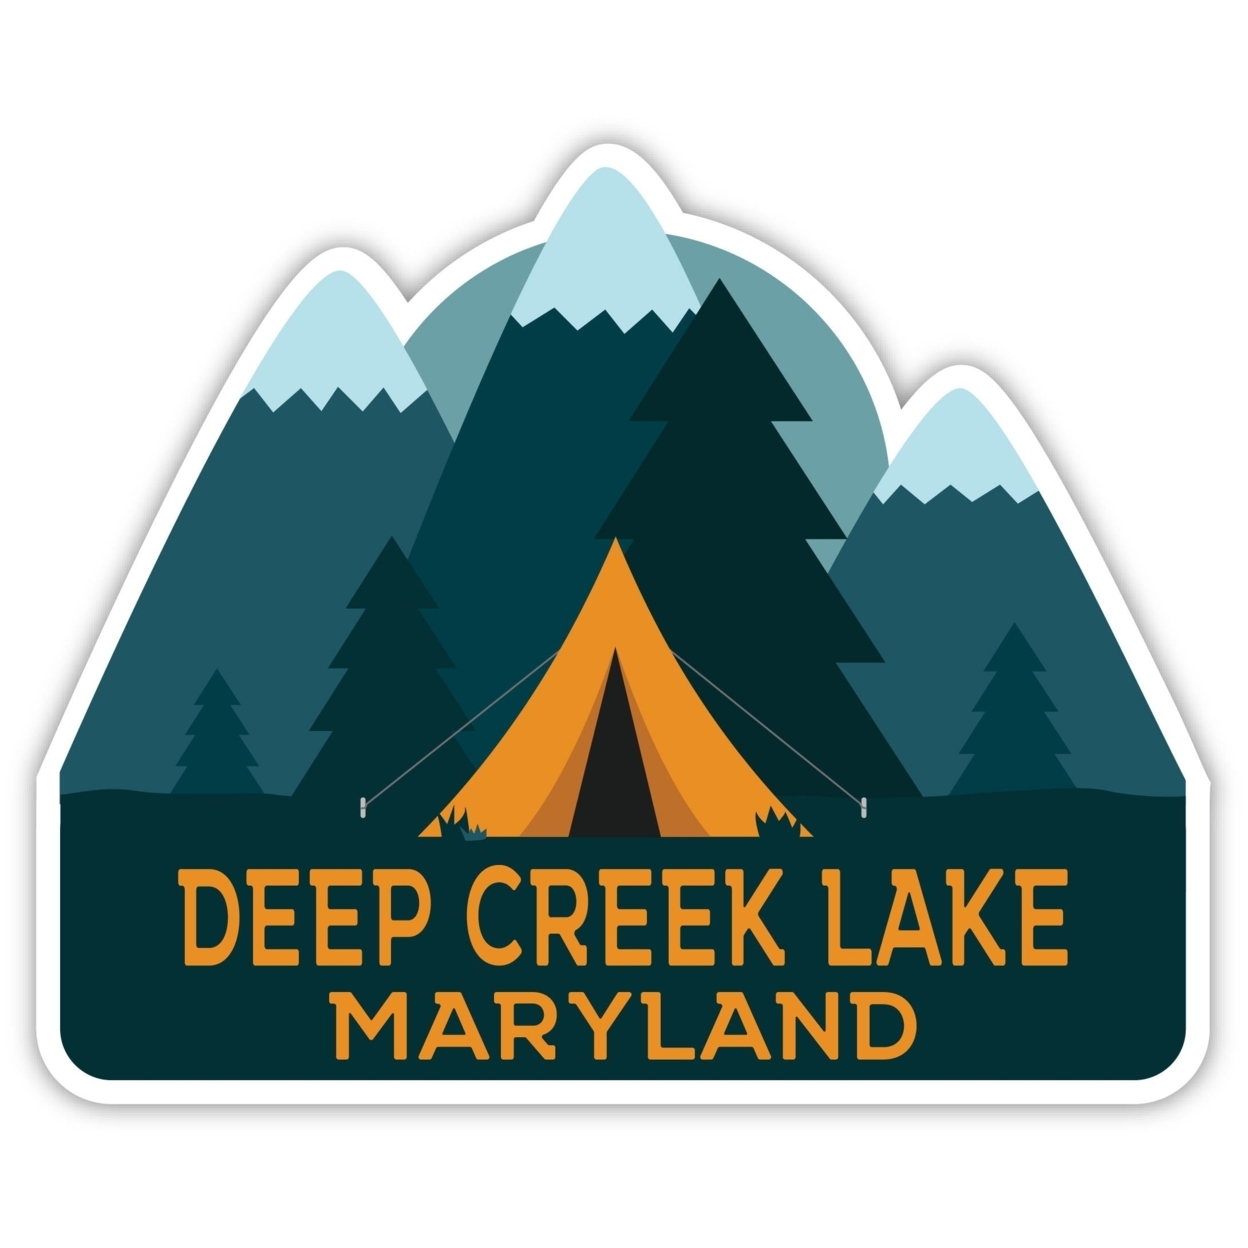 Deep Creek Lake Maryland Souvenir Decorative Stickers (Choose Theme And Size) - 4-Pack, 2-Inch, Tent